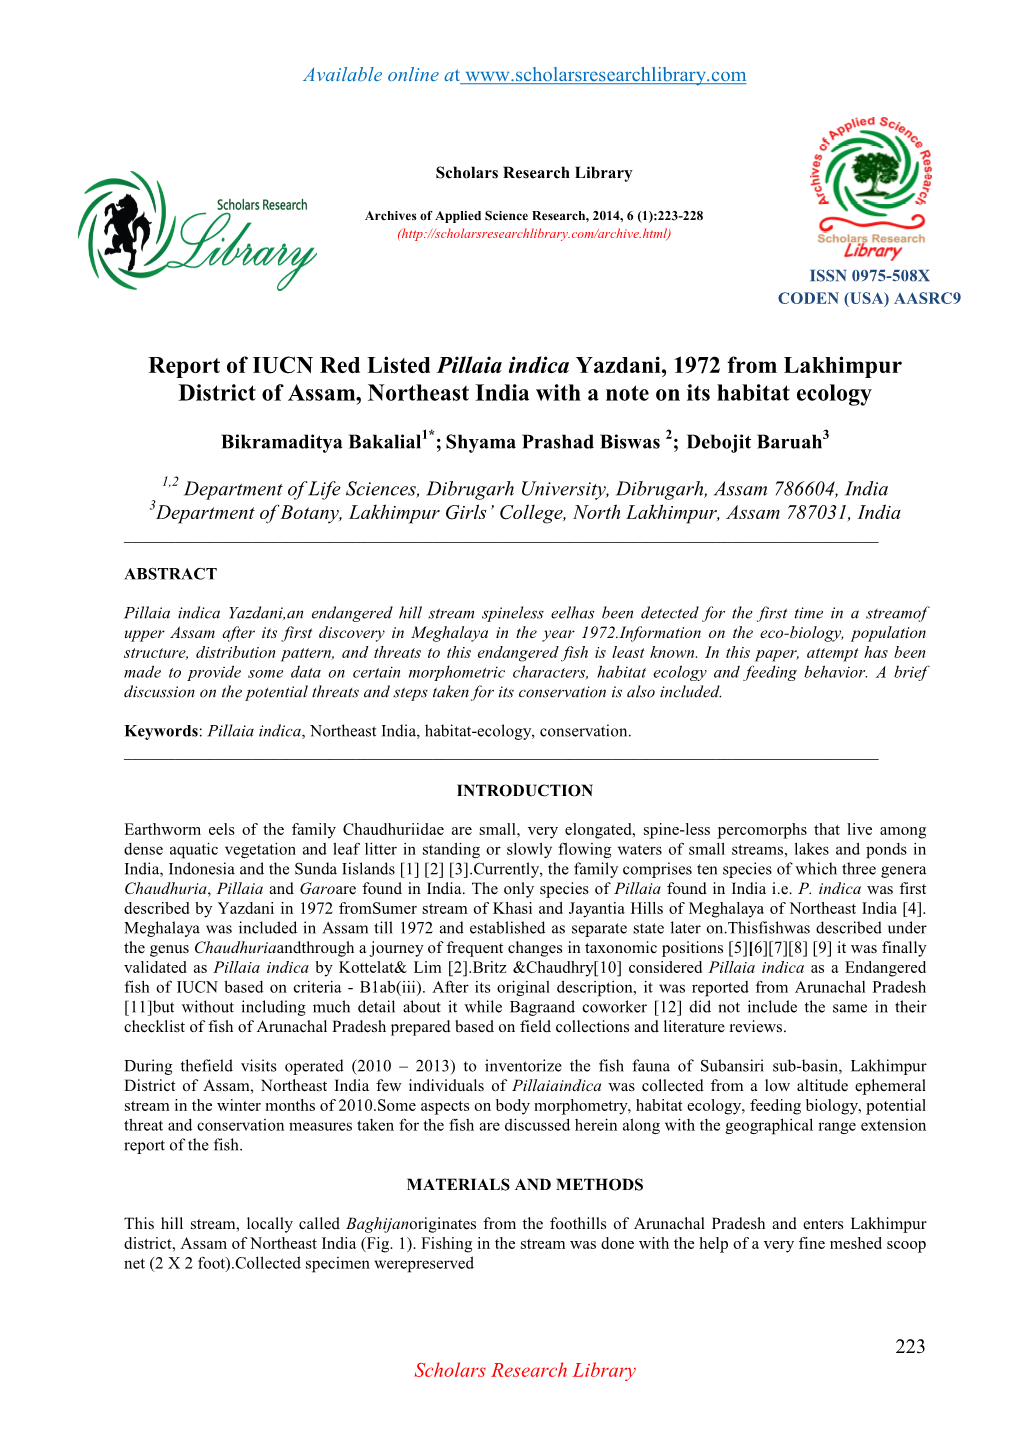 Report of IUCN Red Listed Pillaia Indica Yazdani, 1972 from Lakhimpur District of Assam, Northeast India with a Note on Its Habitat Ecology